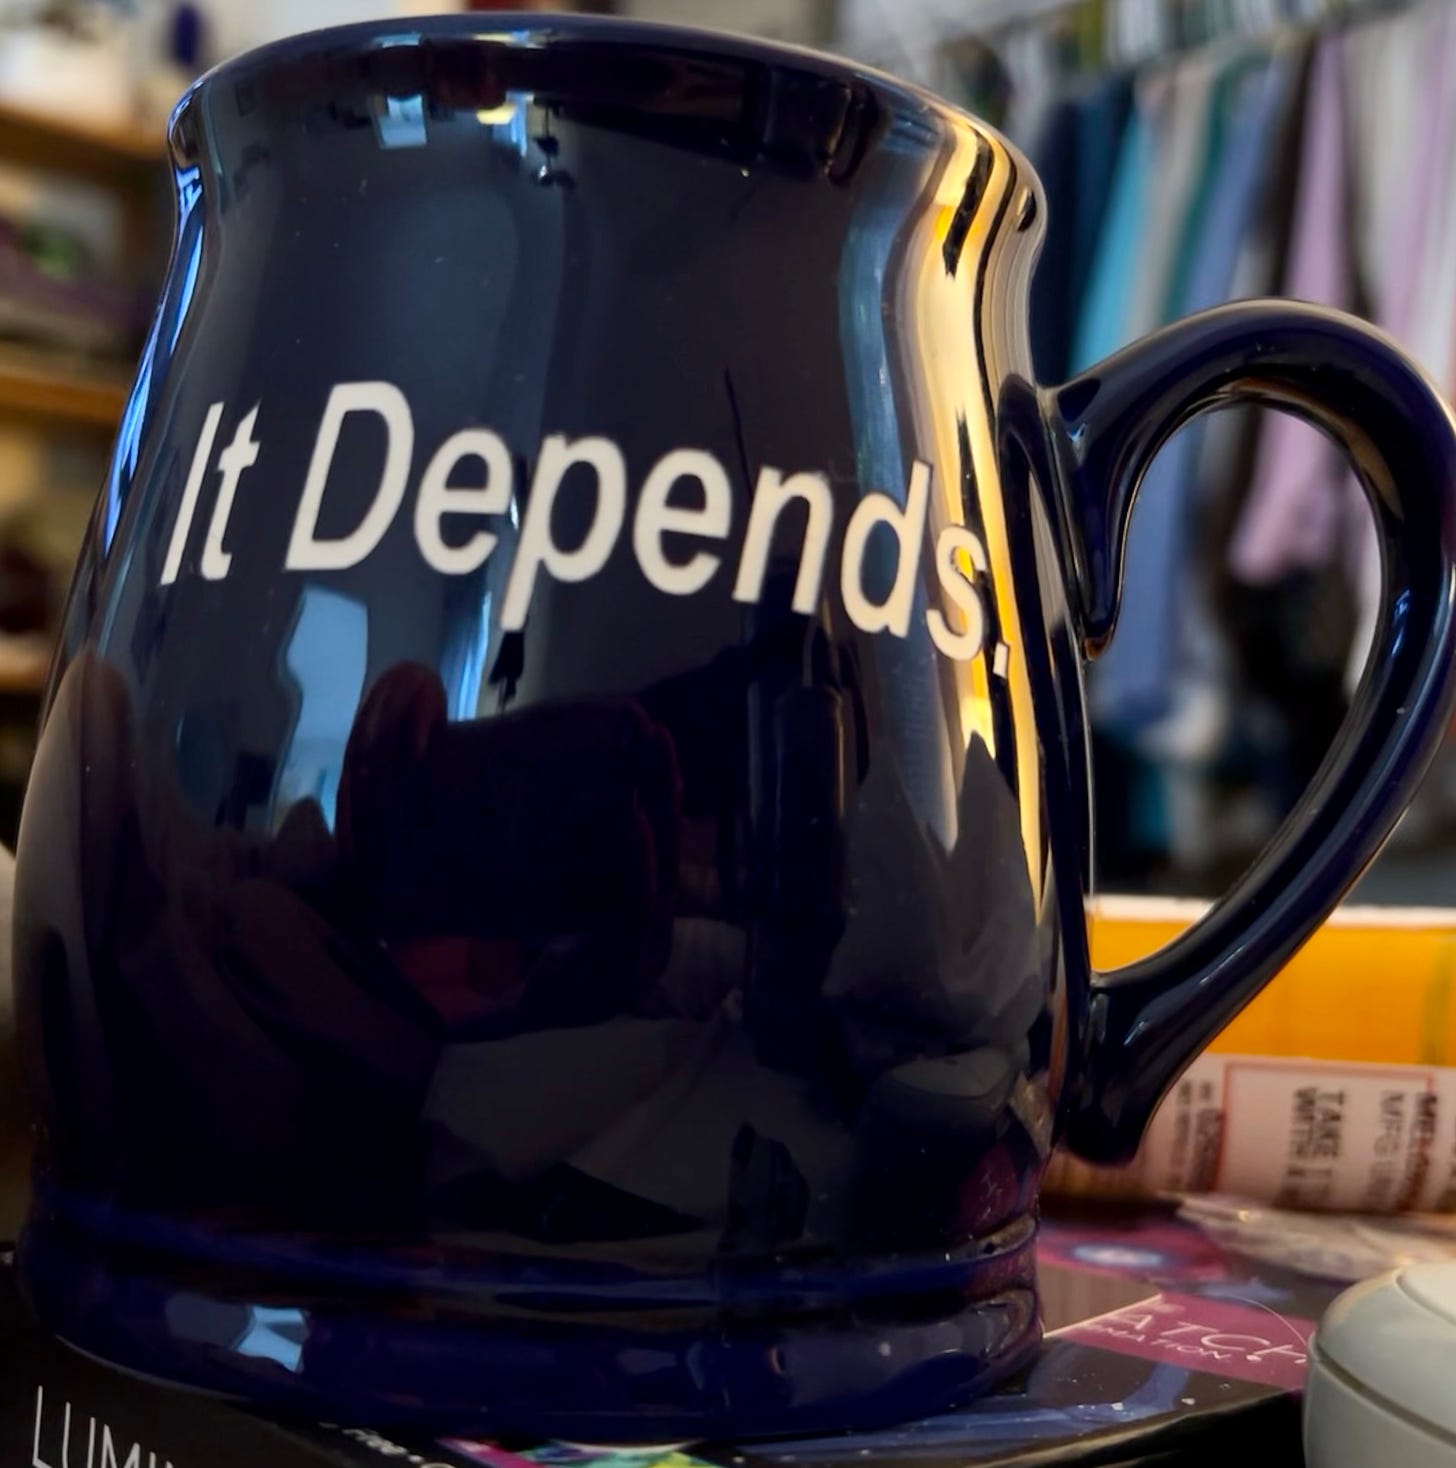 A dark blue coffee mug with the words “It Depends” written on it in a typeface.